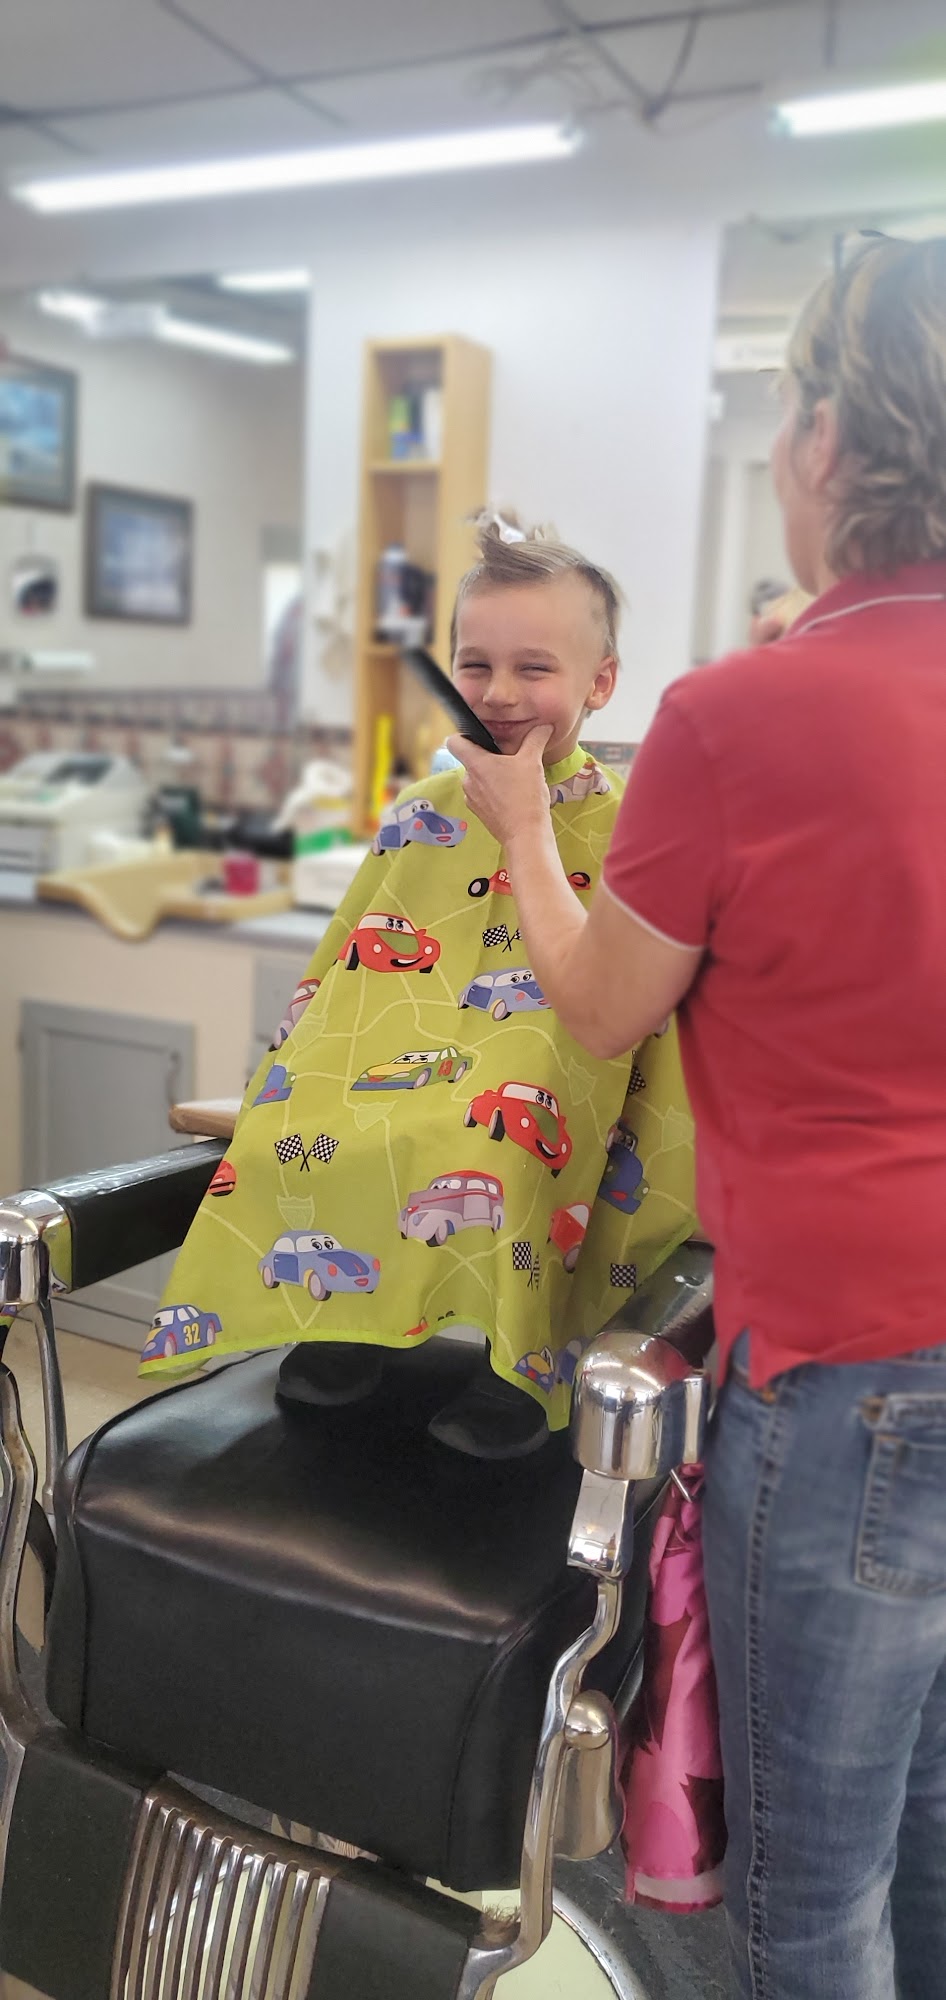 Lunsford's Barber Shop & Styles